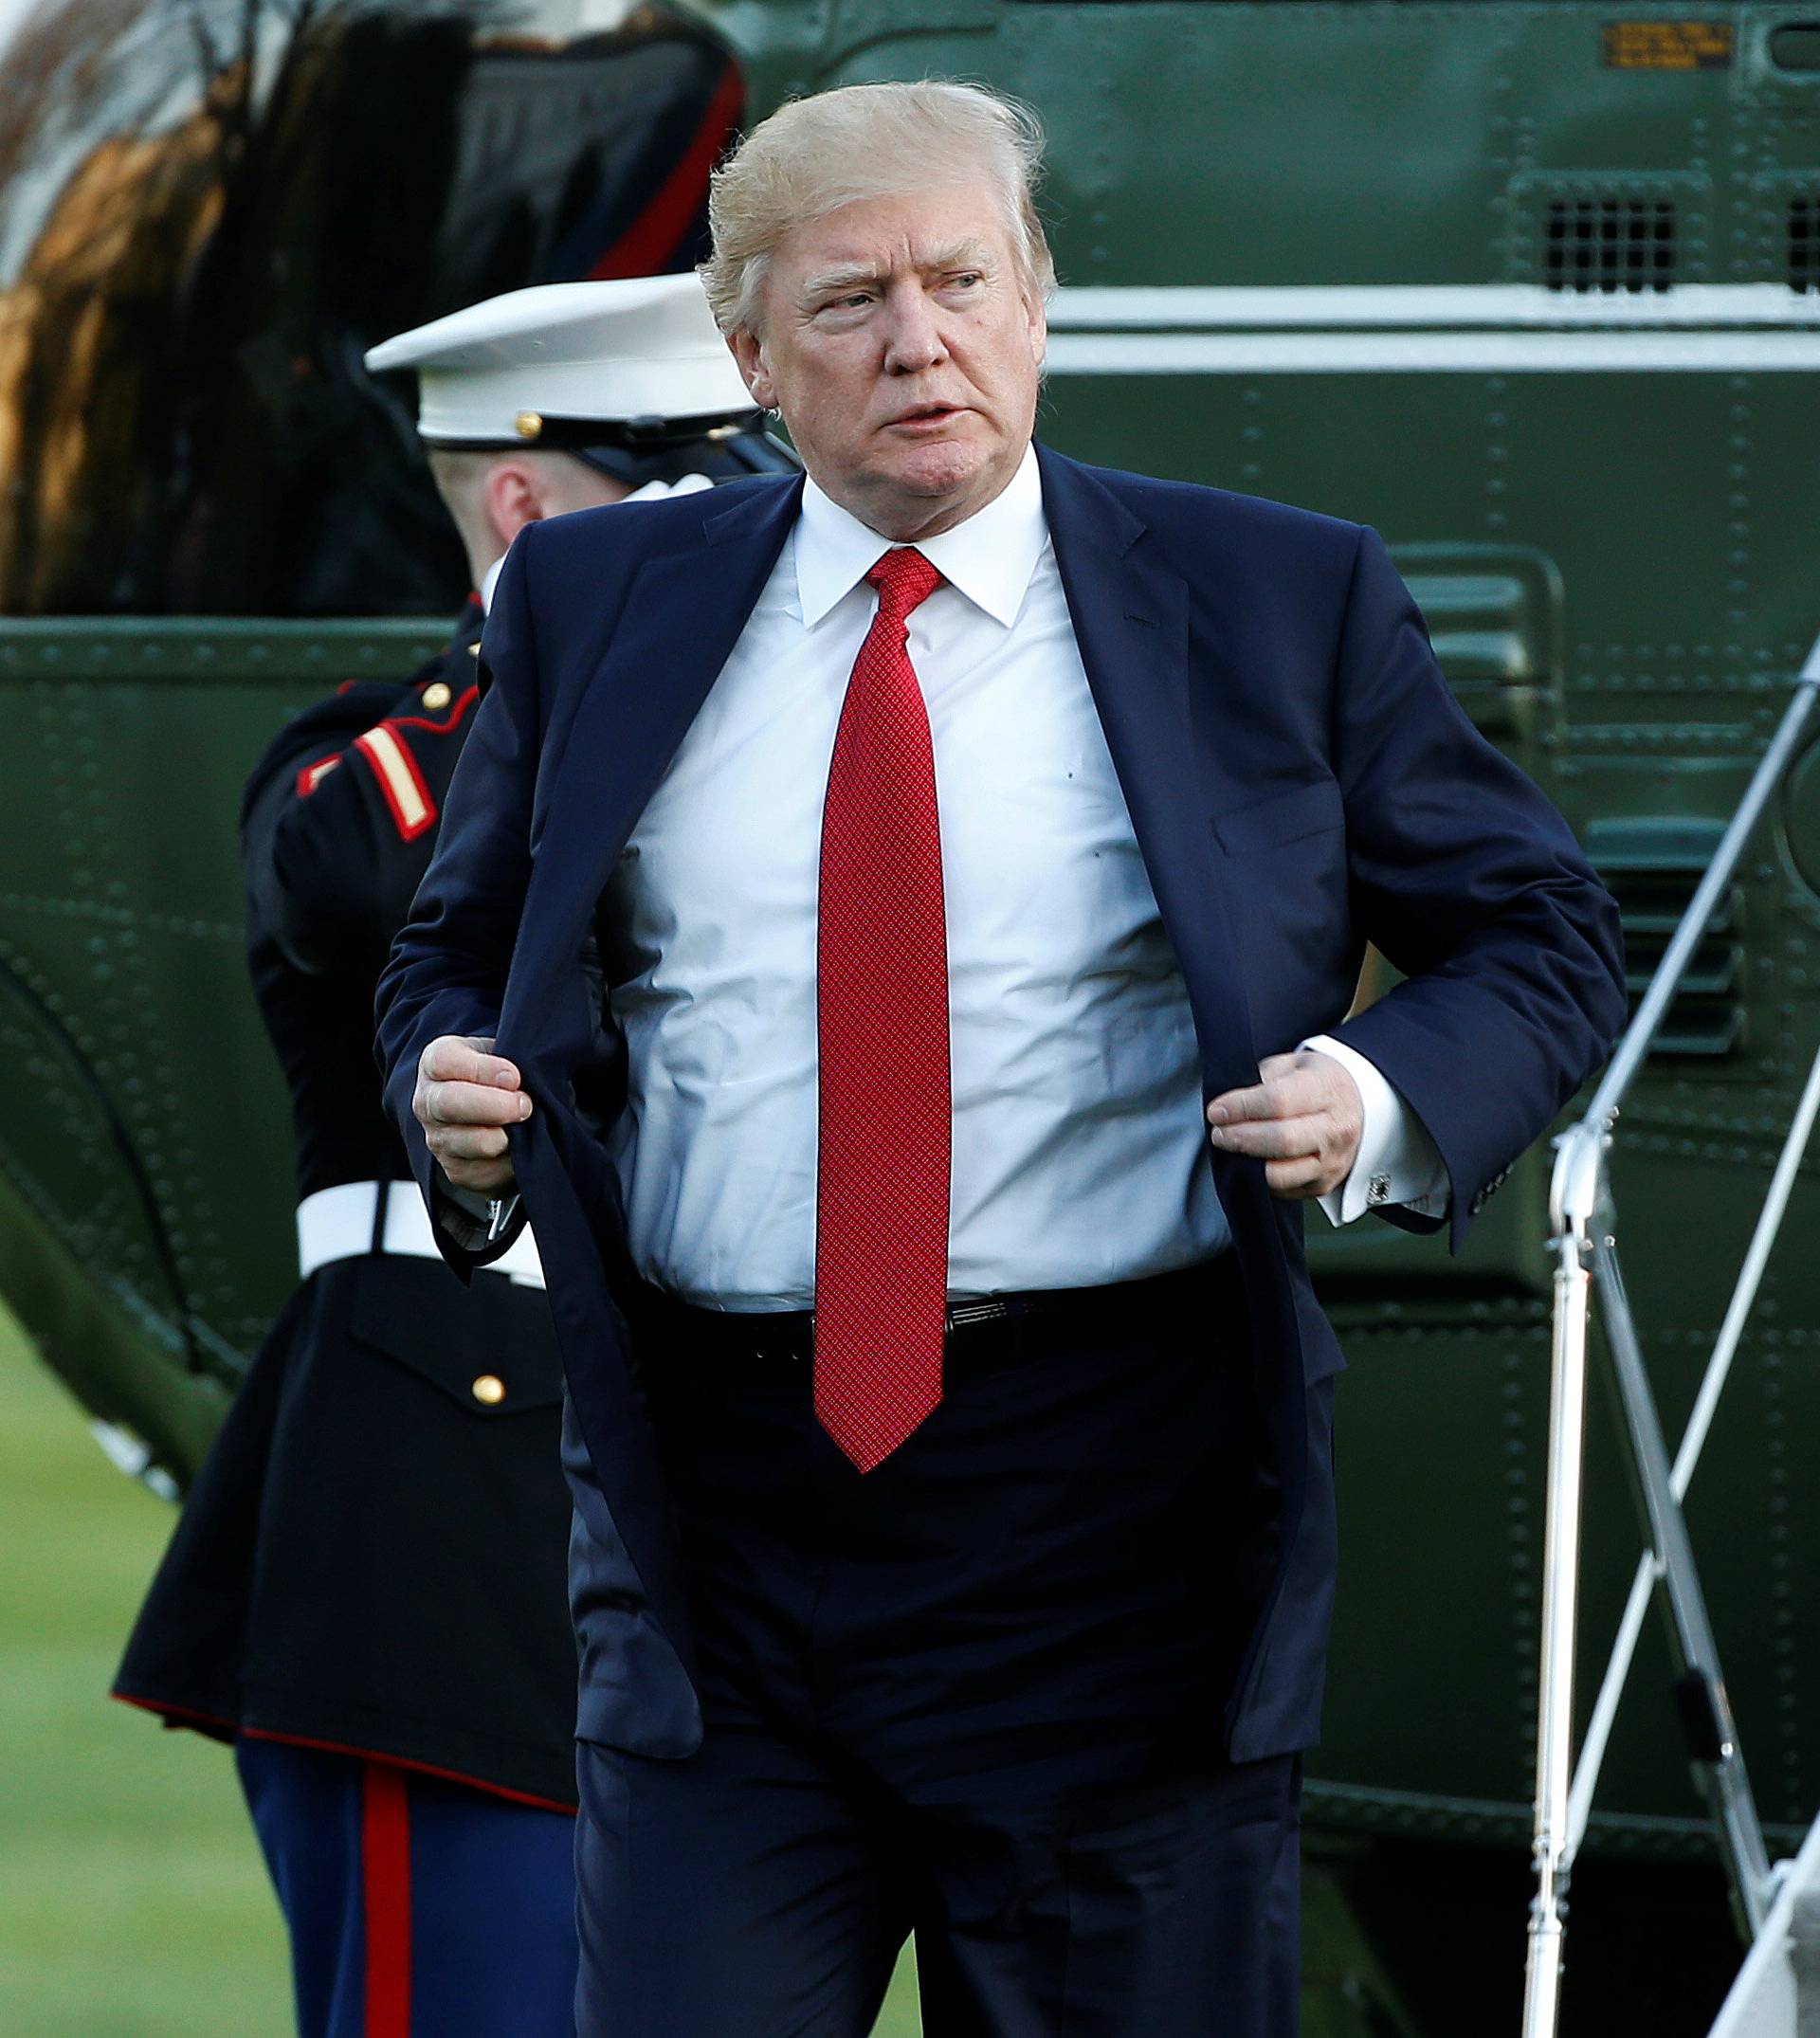 U.S. President Donald Trump adjusts his jacket as he walks from Marine One upon his return to the White House in Washington